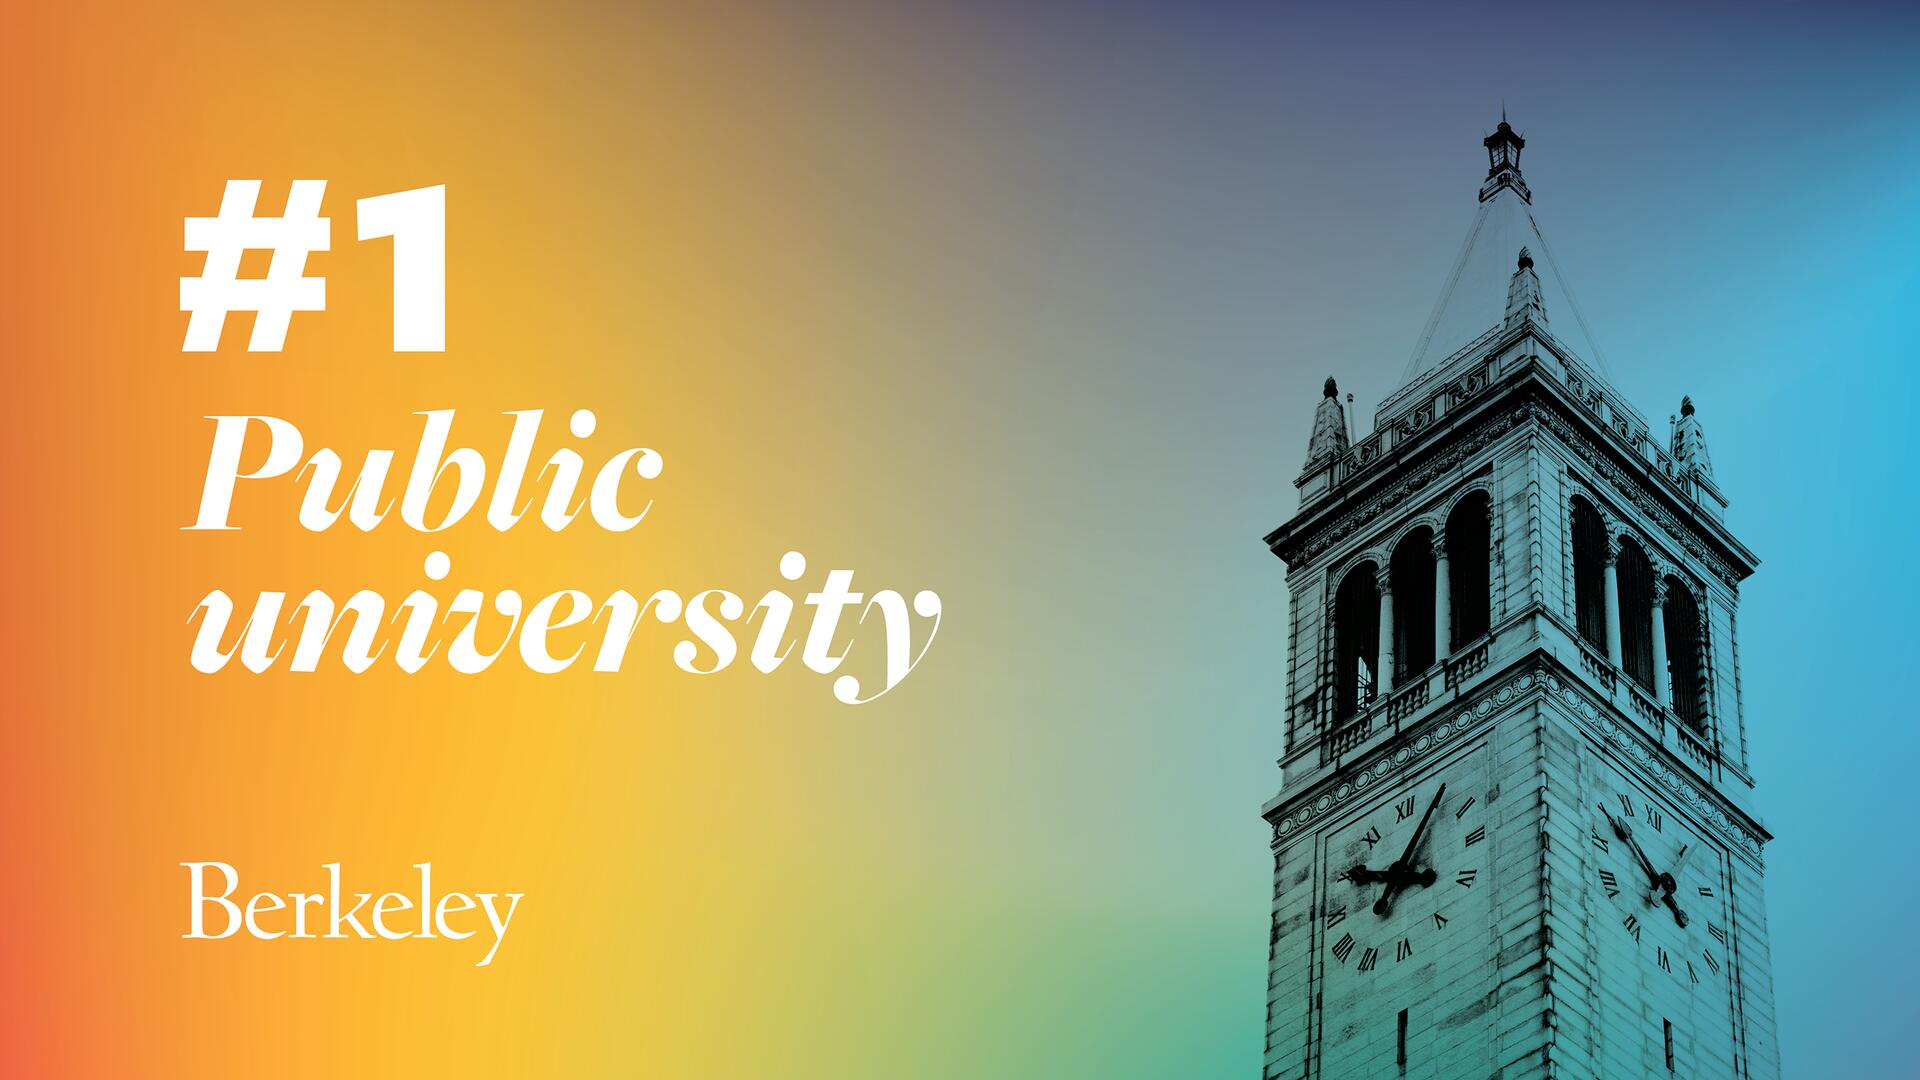 UC Berkeley ranked #1 by US News and World Report